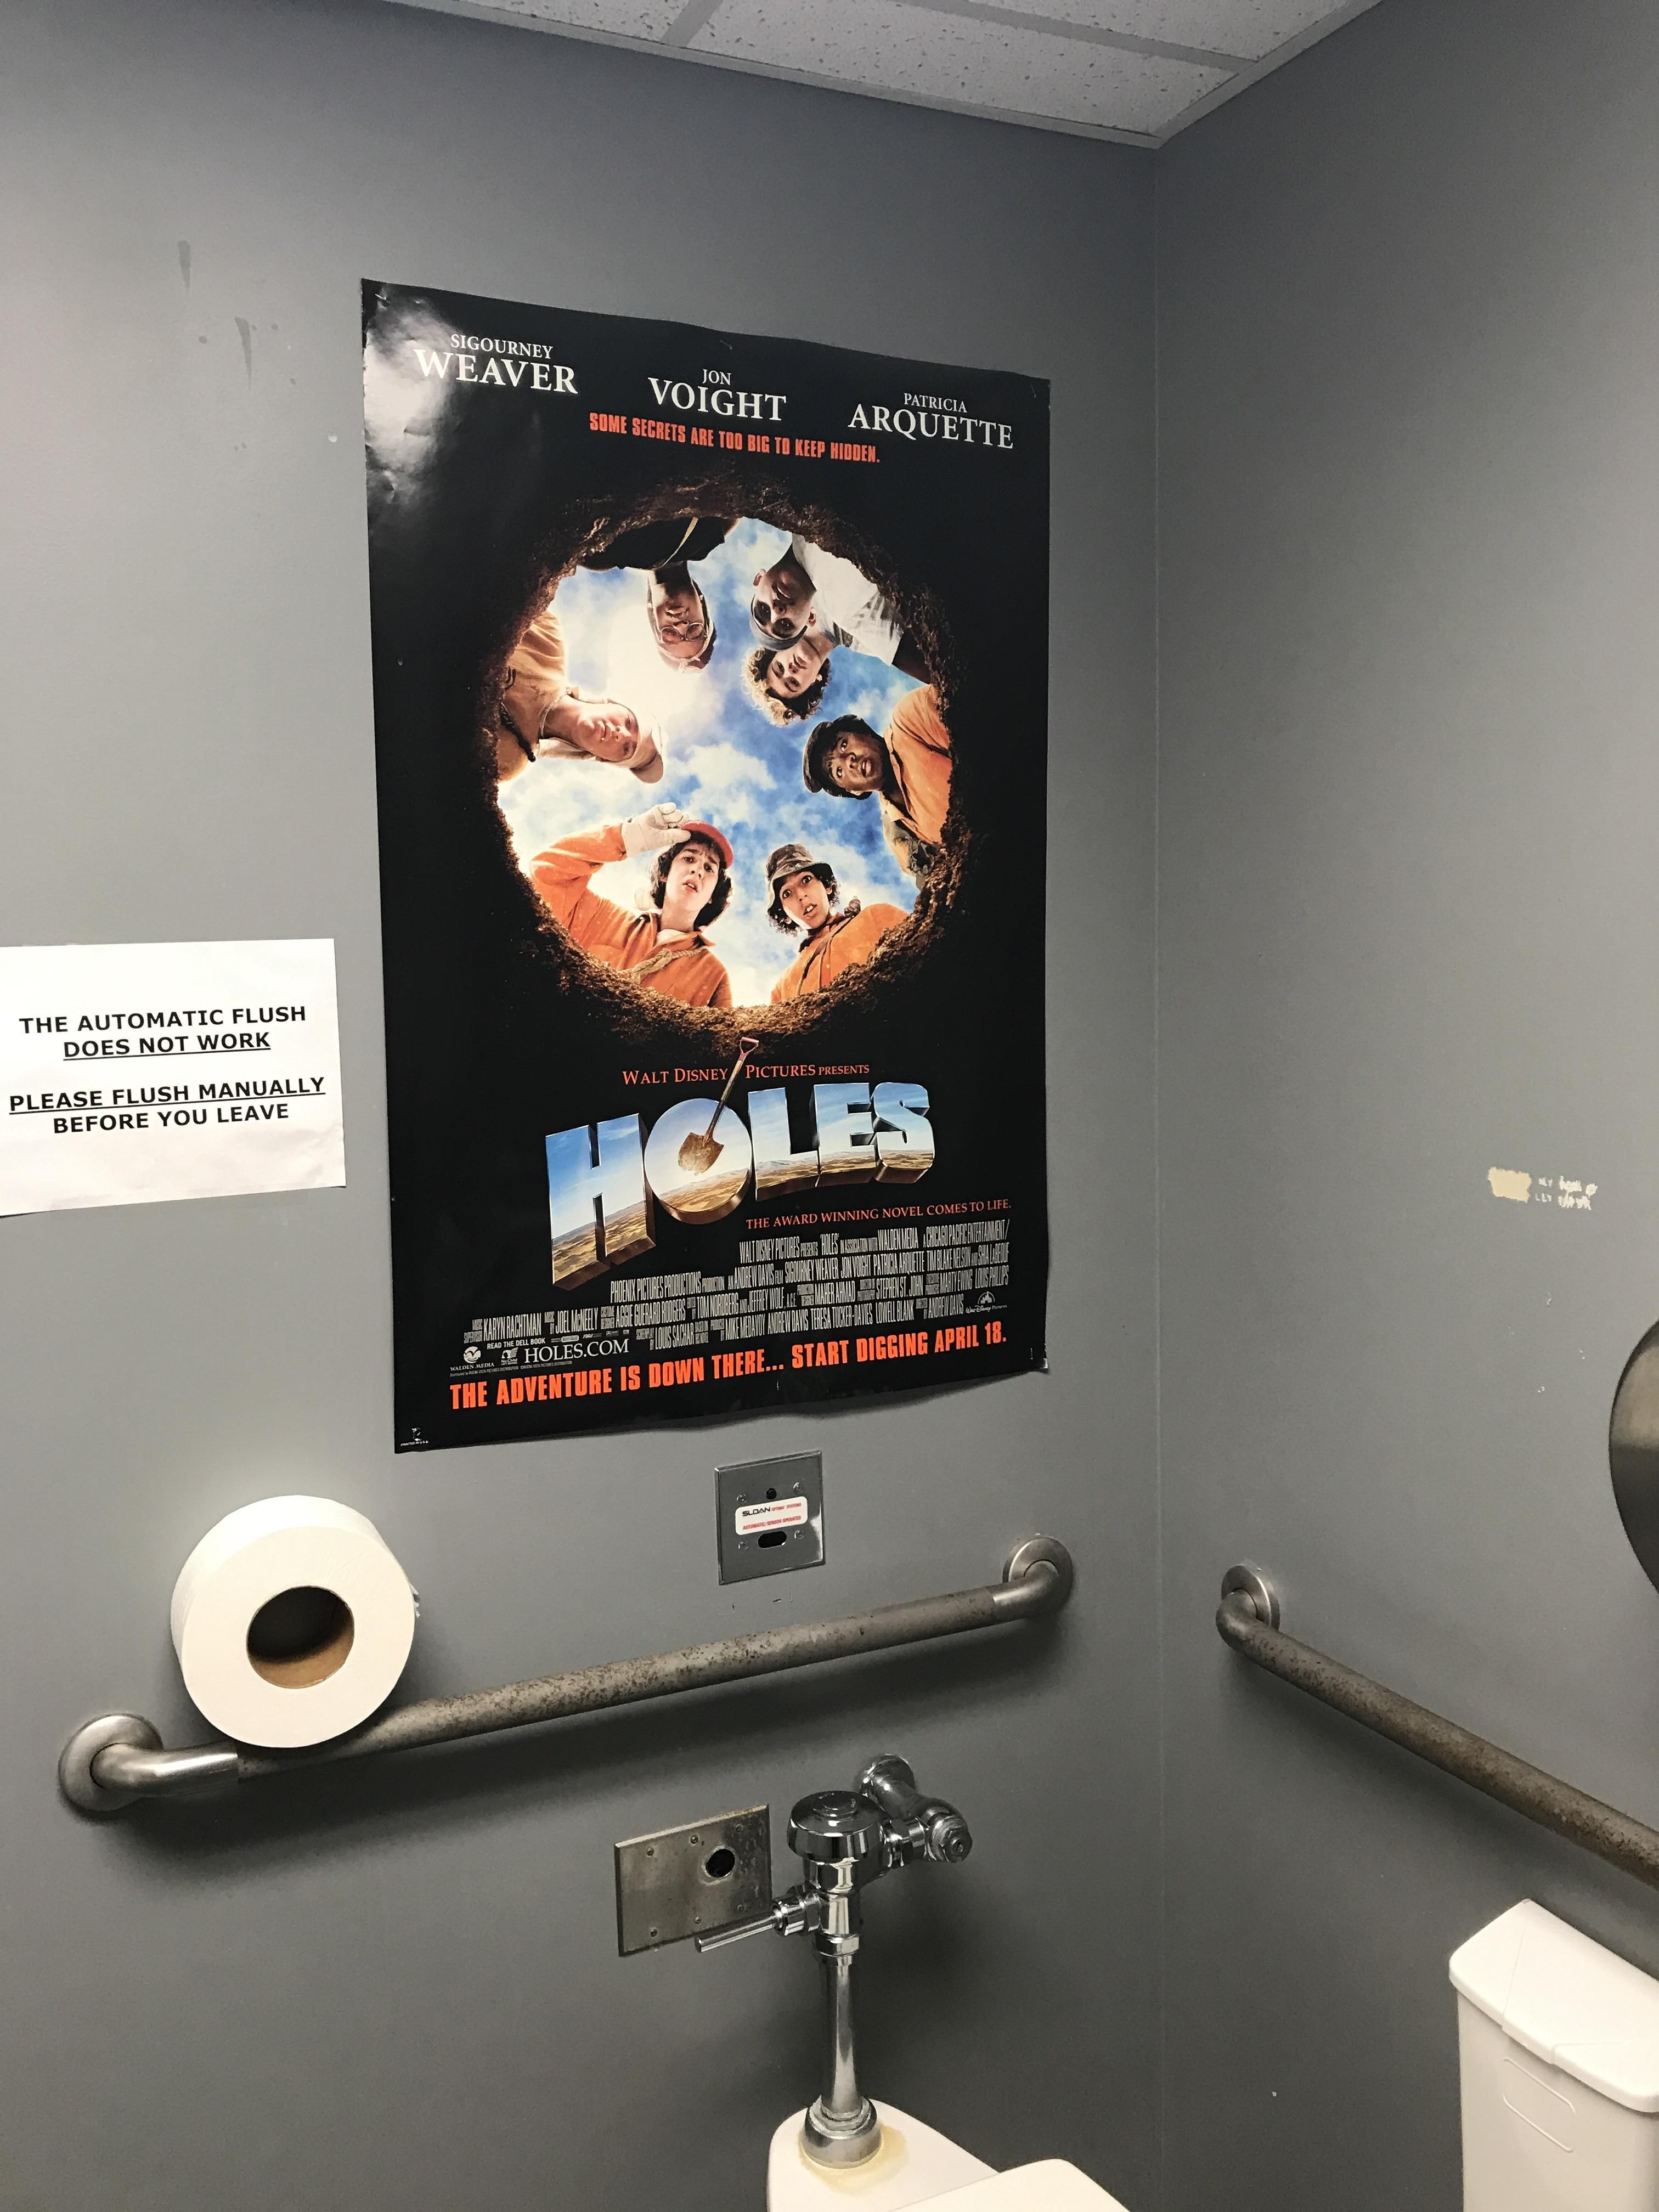 I work at a cinema, this is the poster they have in the bathroom